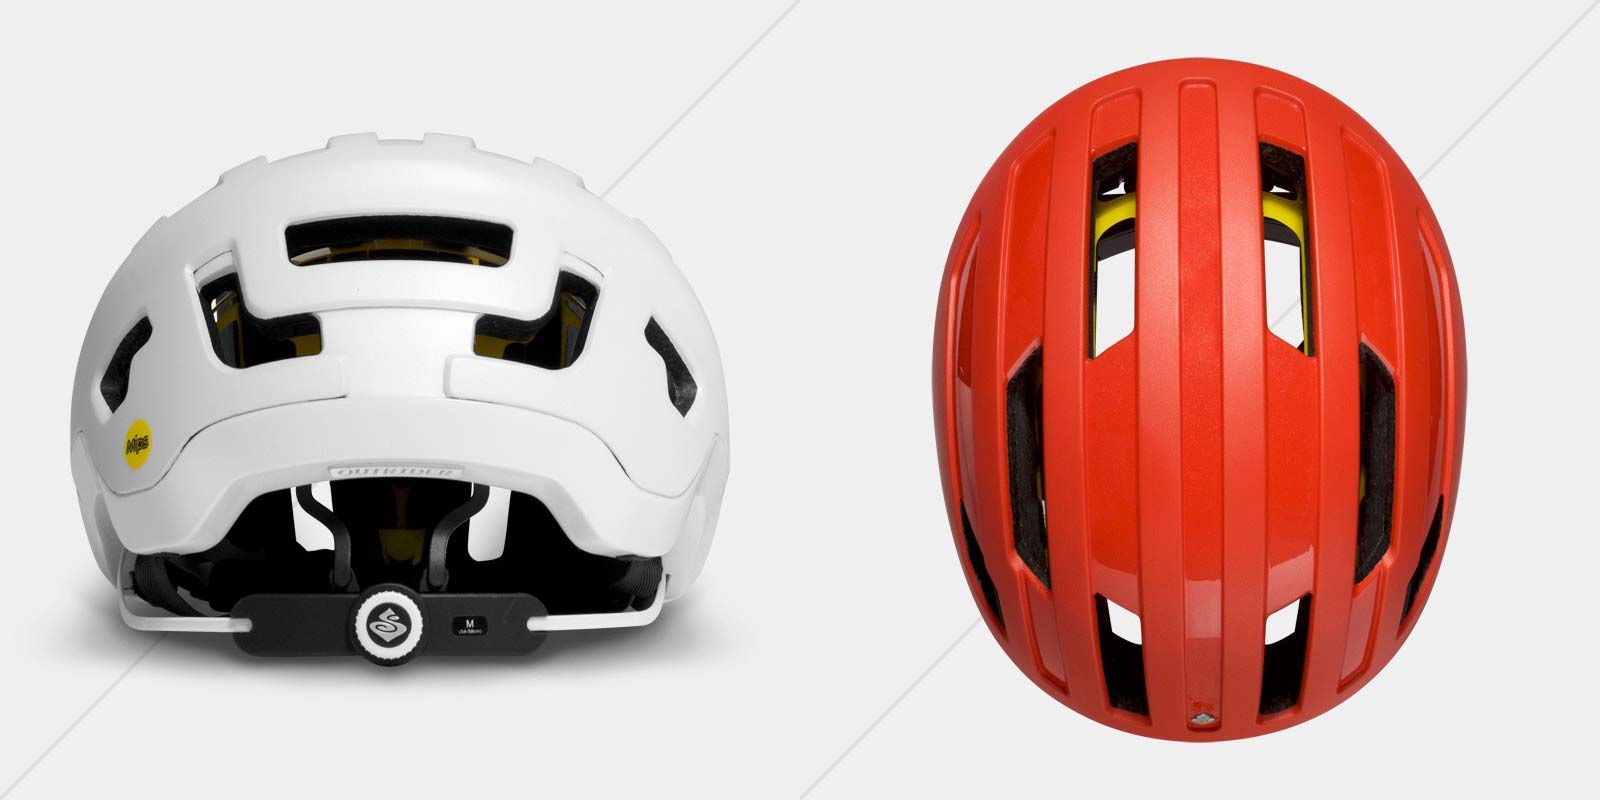 Sweet Protection's new Outrider delivers affordable, everyday road helmet -  Bikerumor